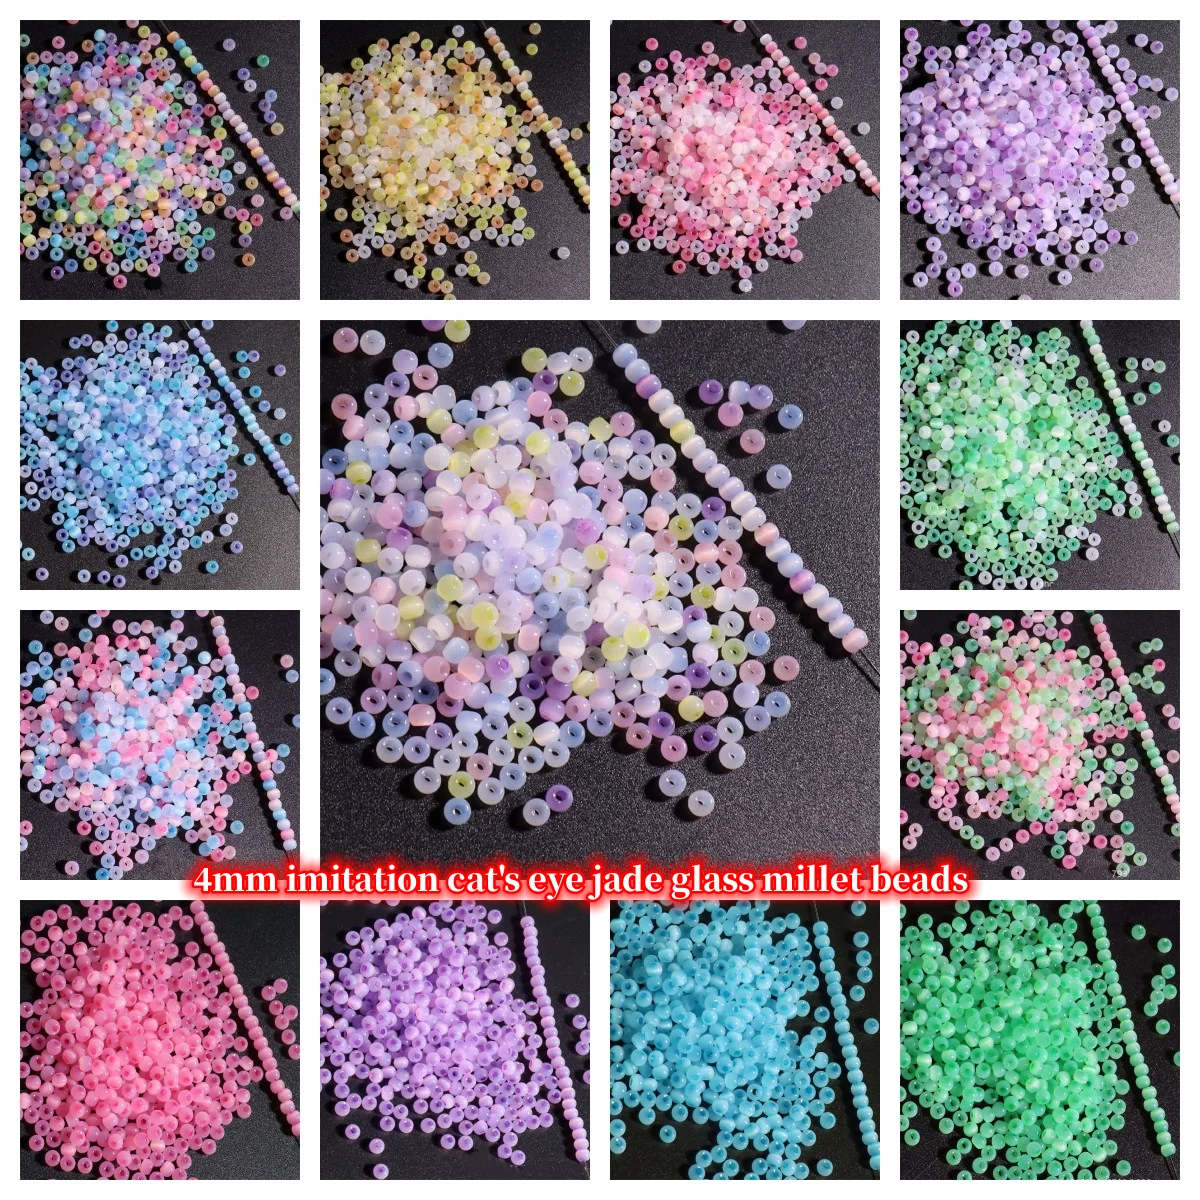 

130Pcs 4mm Cat Eye Beads 6/0 Smooth Imitation Jade Glass Seedbeads For DIY Jewelry Making Charm Bracelet Necklace Accessories